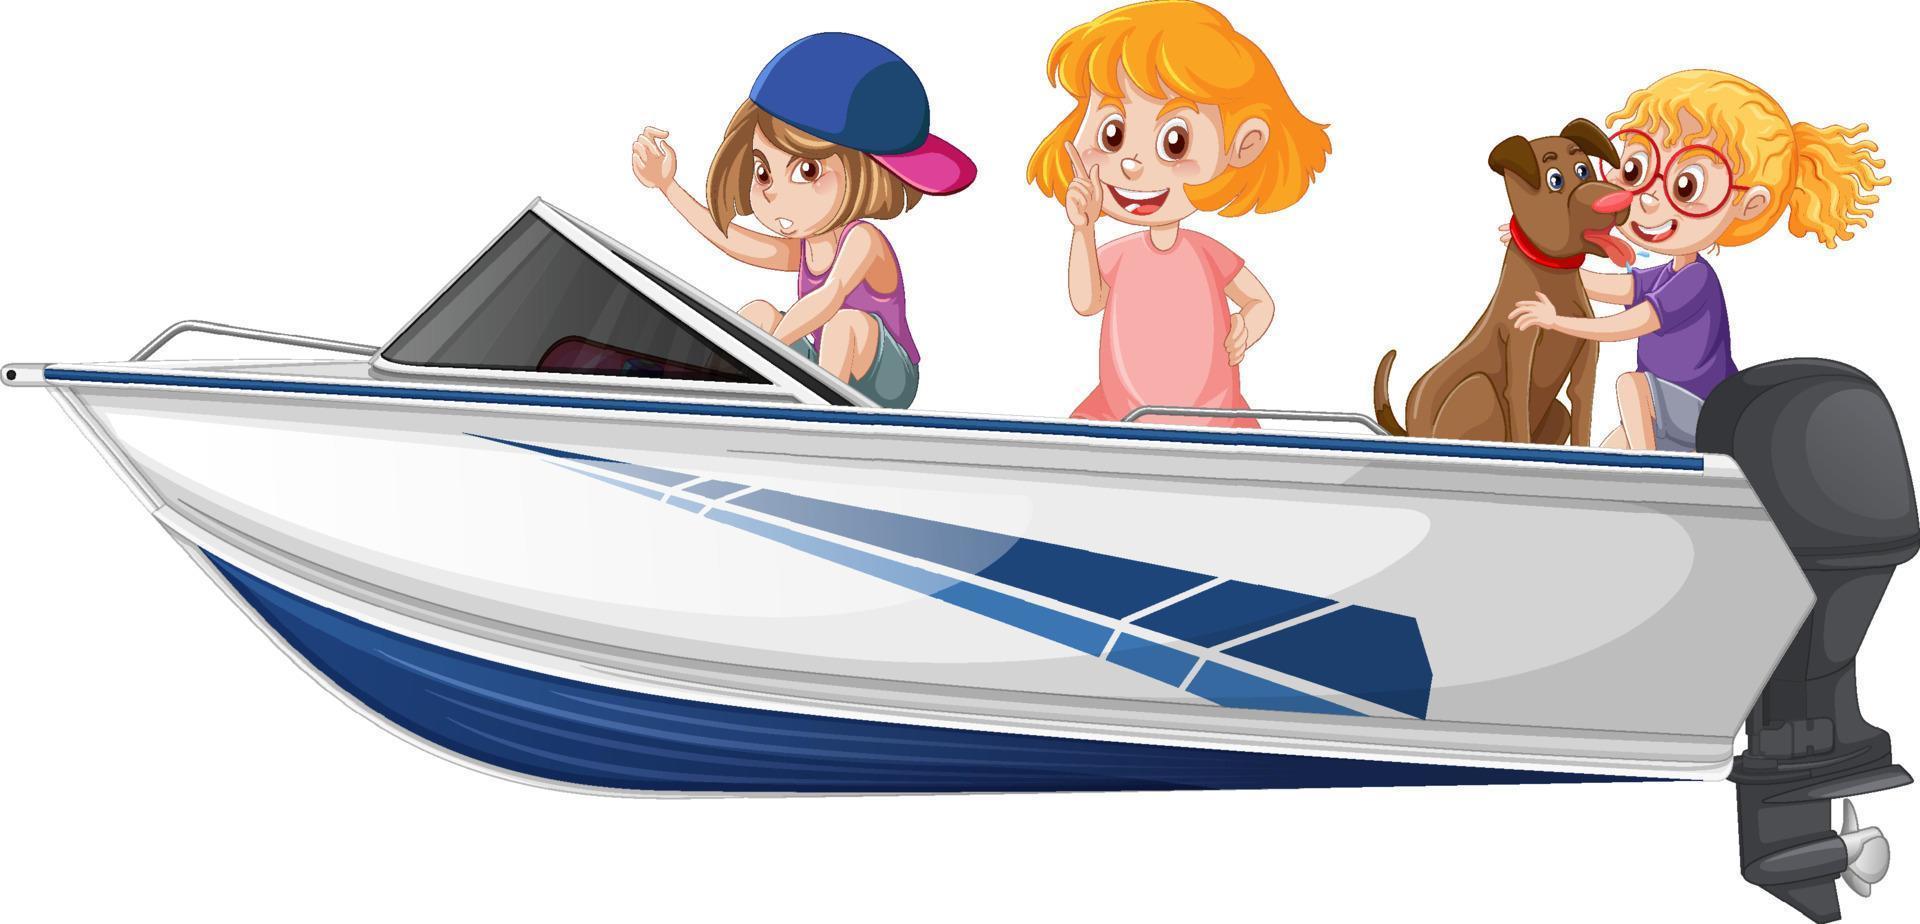 Boy and girl sitting on a speed boat on a white background vector